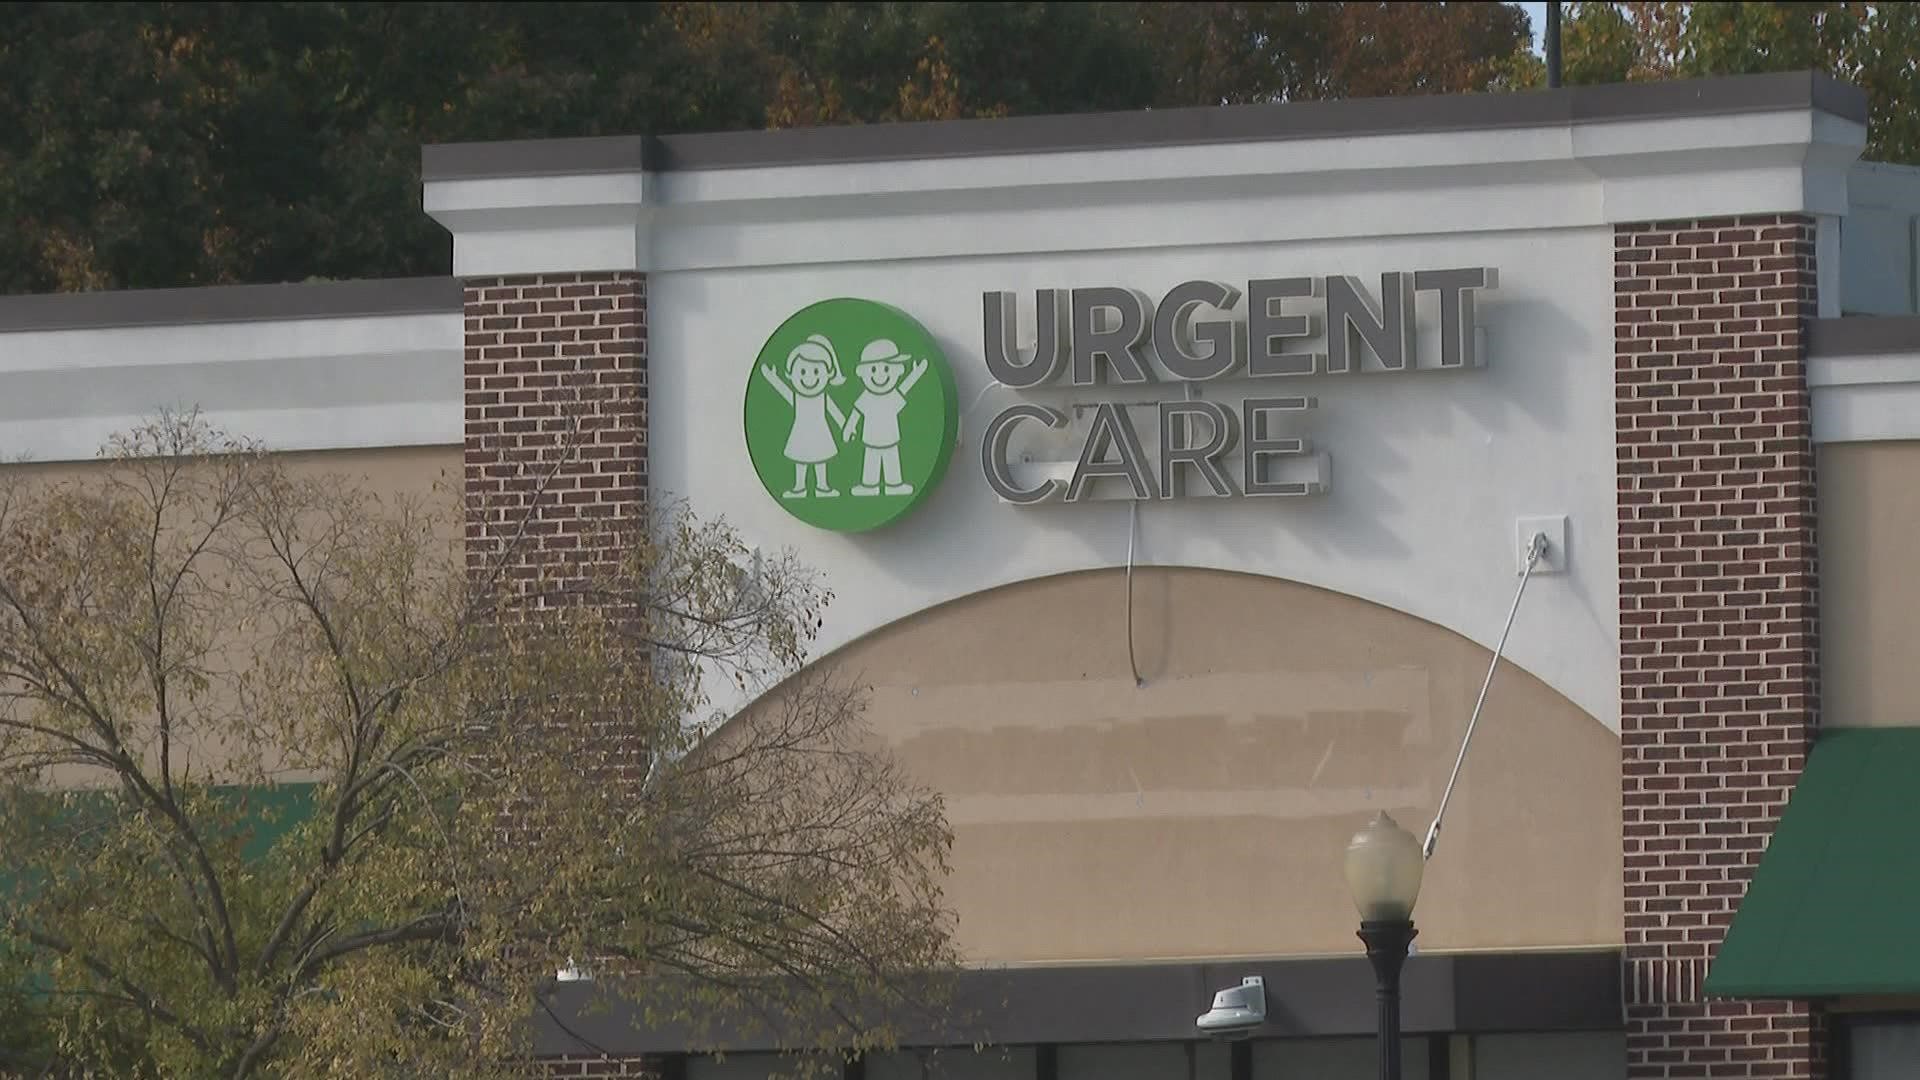 Children's Healthcare of Atlanta said its emergency departments and urgent care centers have been experiencing extremely high volumes at all locations.